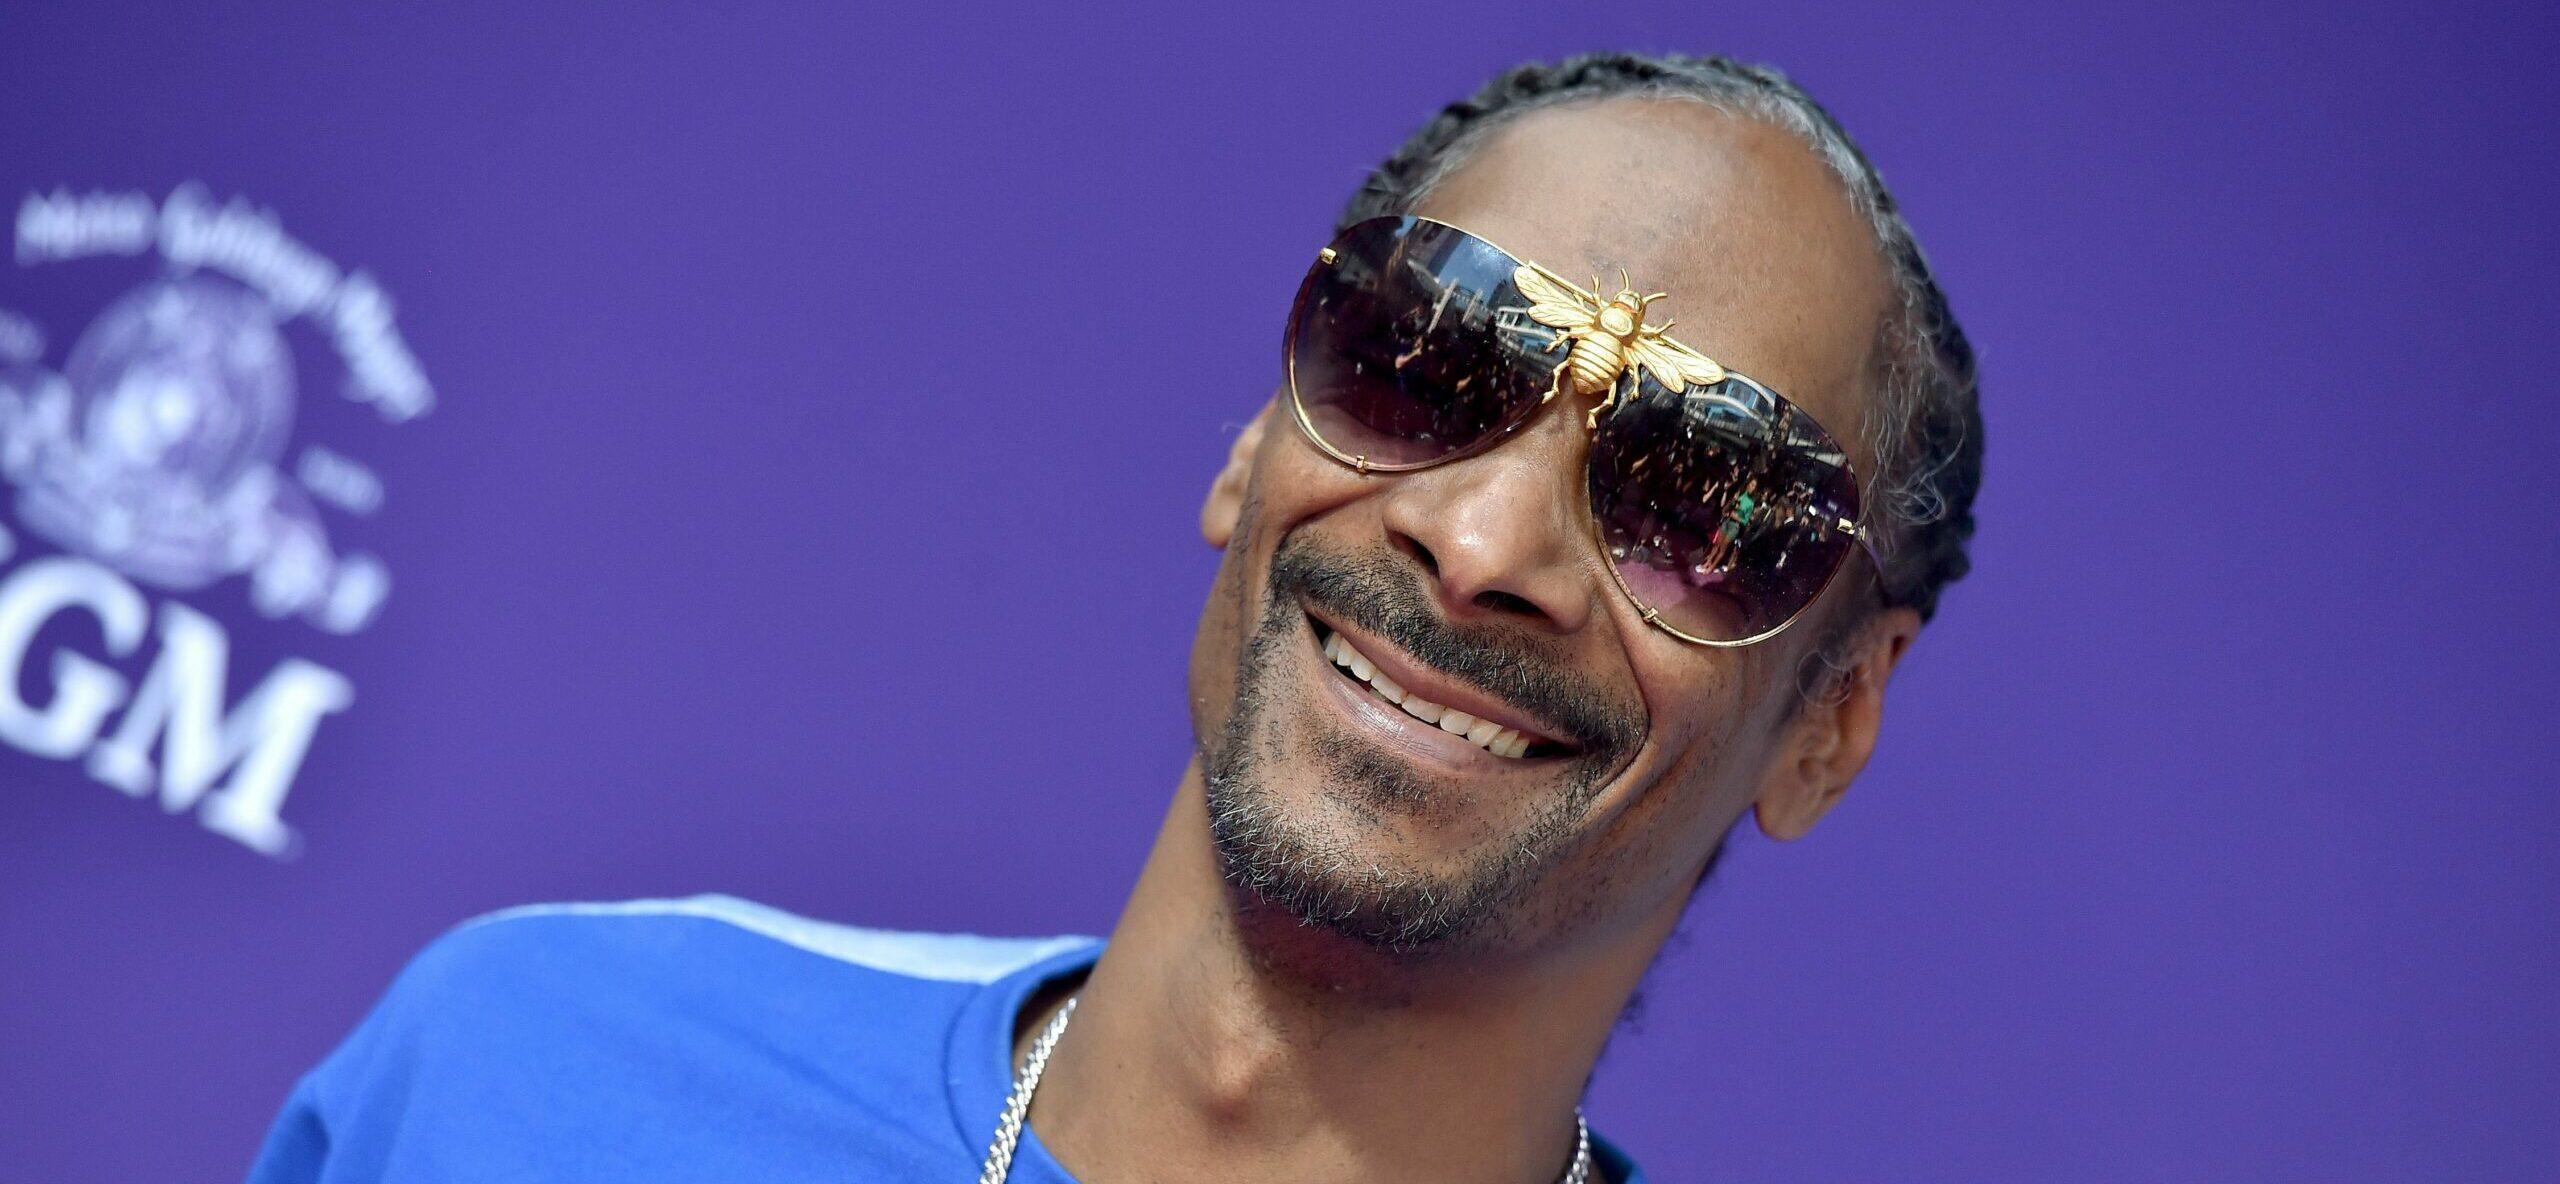 Snoop Dogg At The "The Addams Family" Premiere